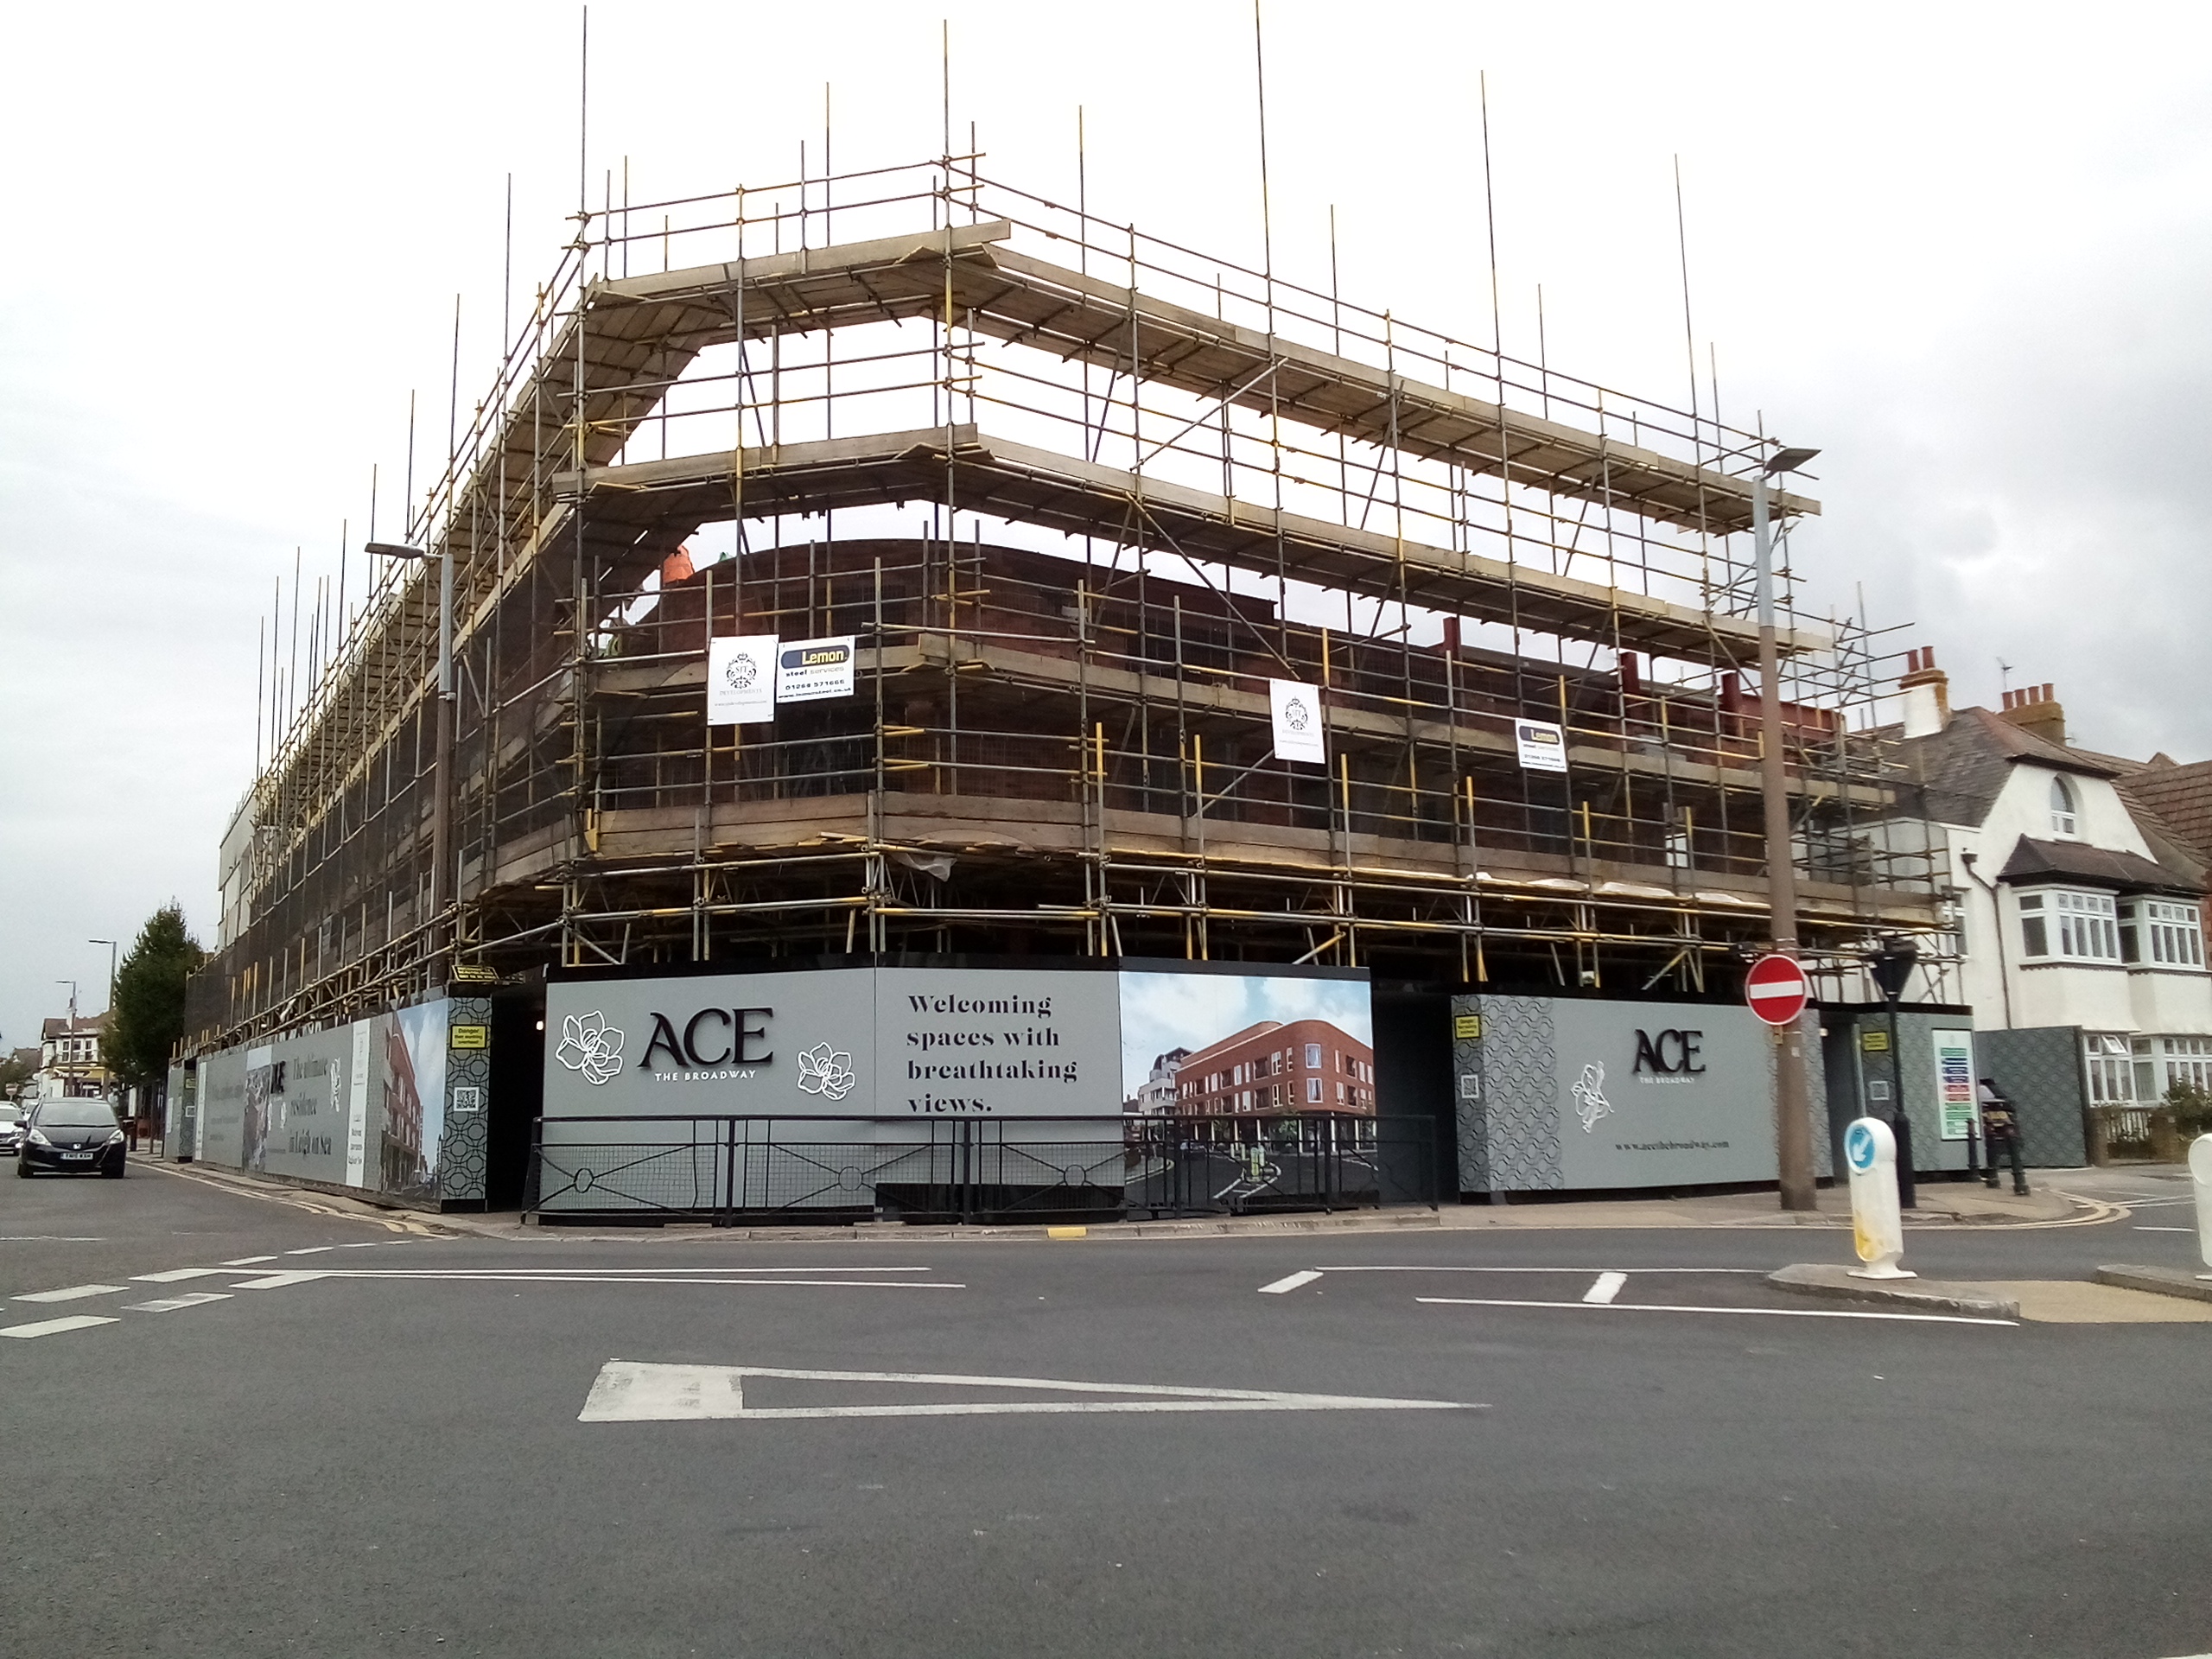 Leigh On Sea News. Luxury Flats Progress - CONSTRUCTION work on a contemporary block of apartments near the Grand Hotel in Leigh is swiftly advancing.